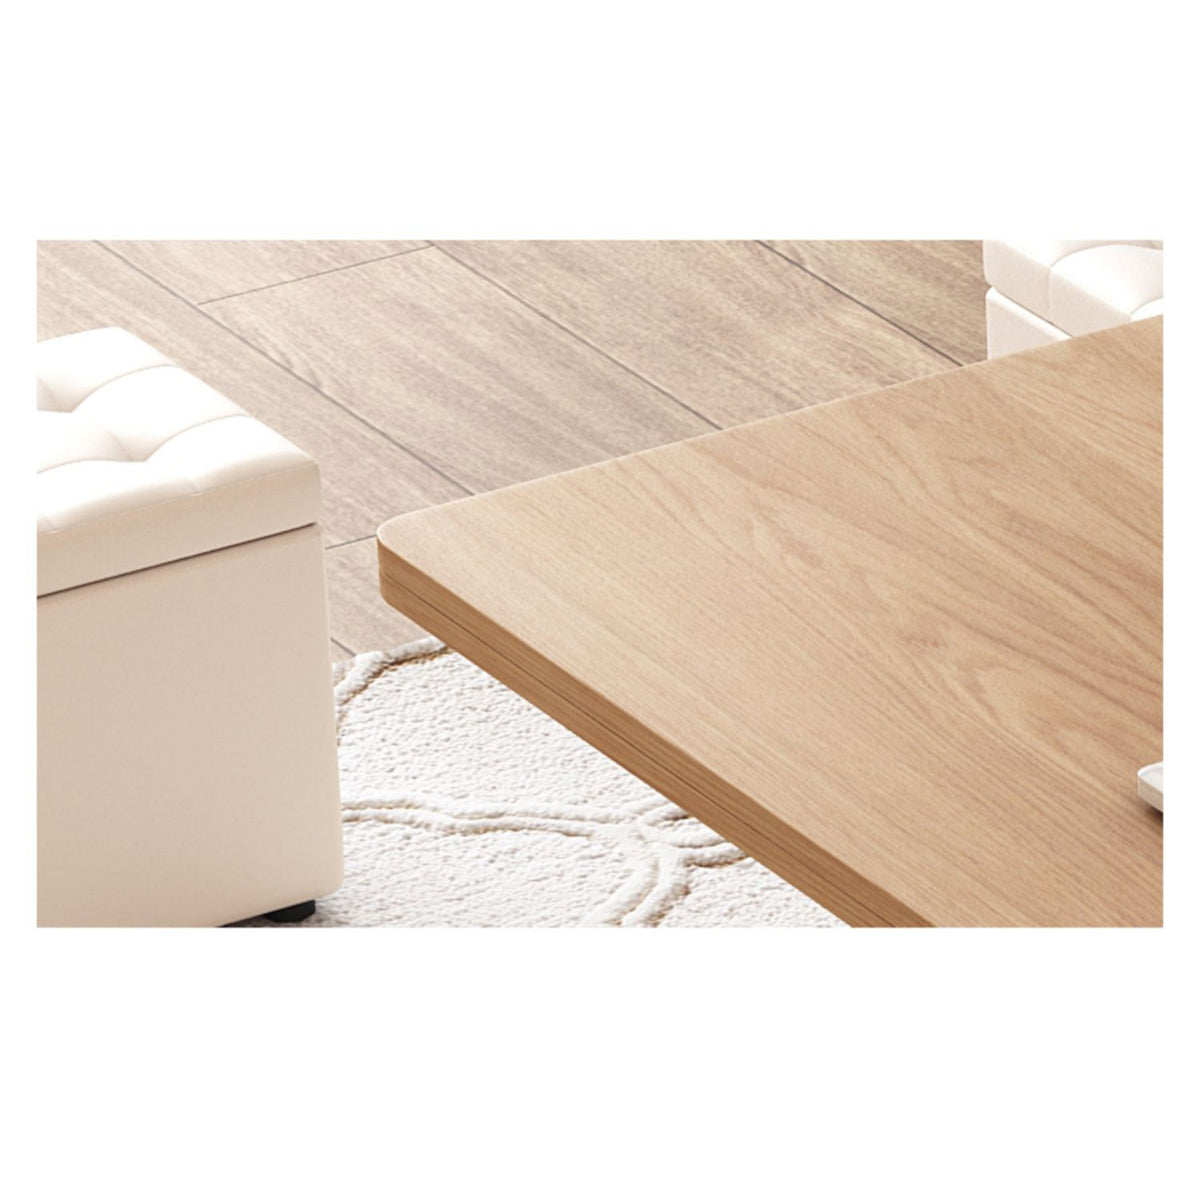 Elegant White Tea Table with Natural Solid Oak Wood and Ceramic Accents hx-1565